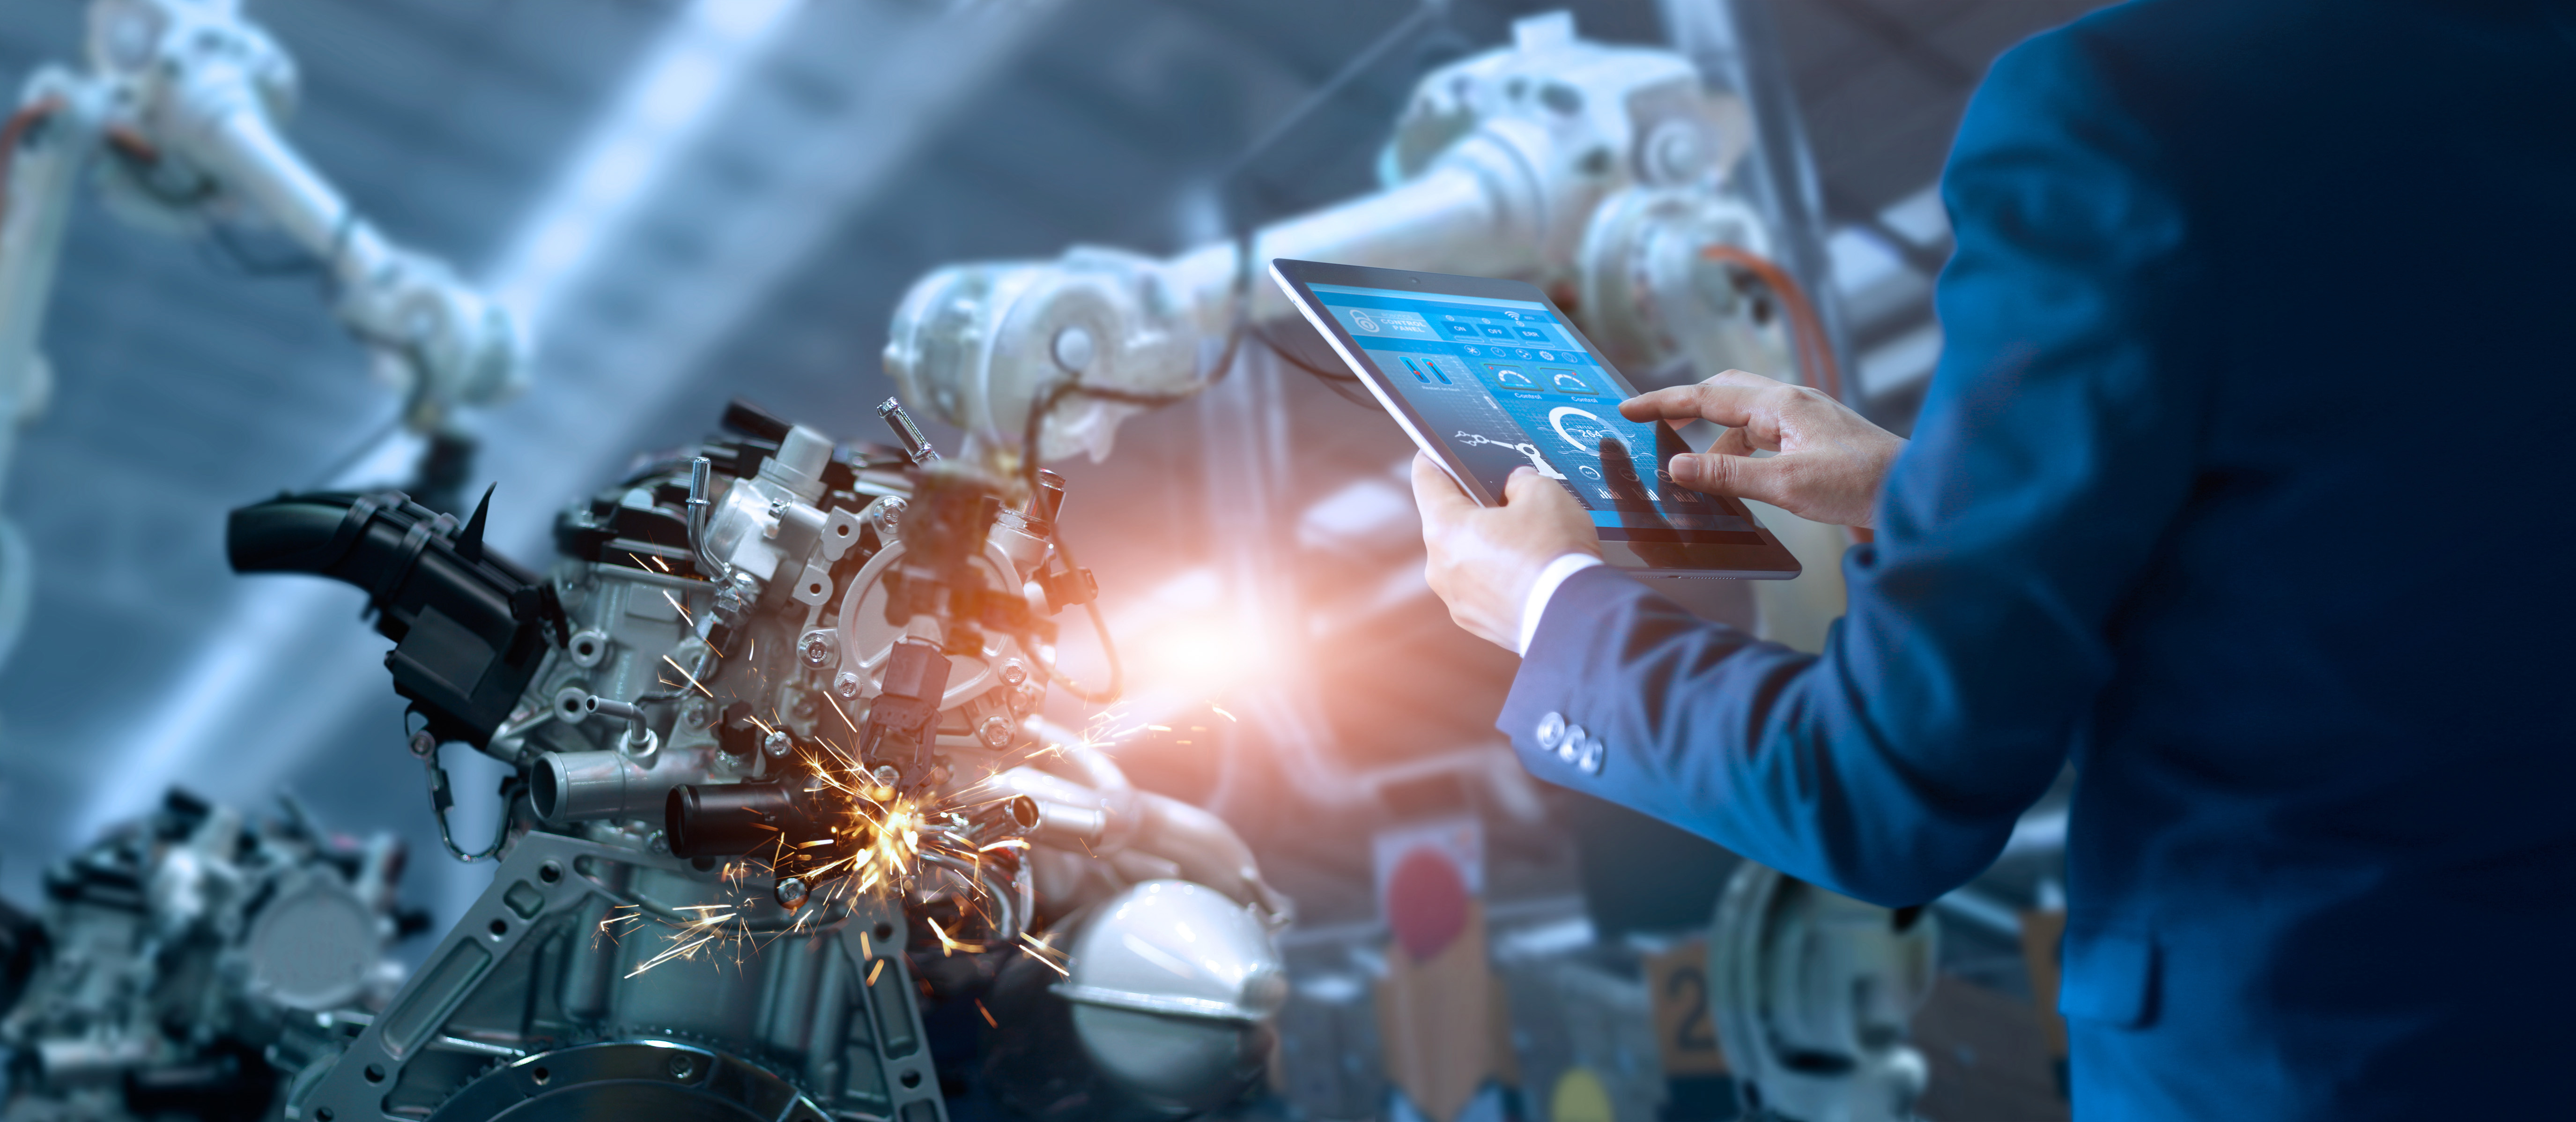 Technology trends in manufacturing